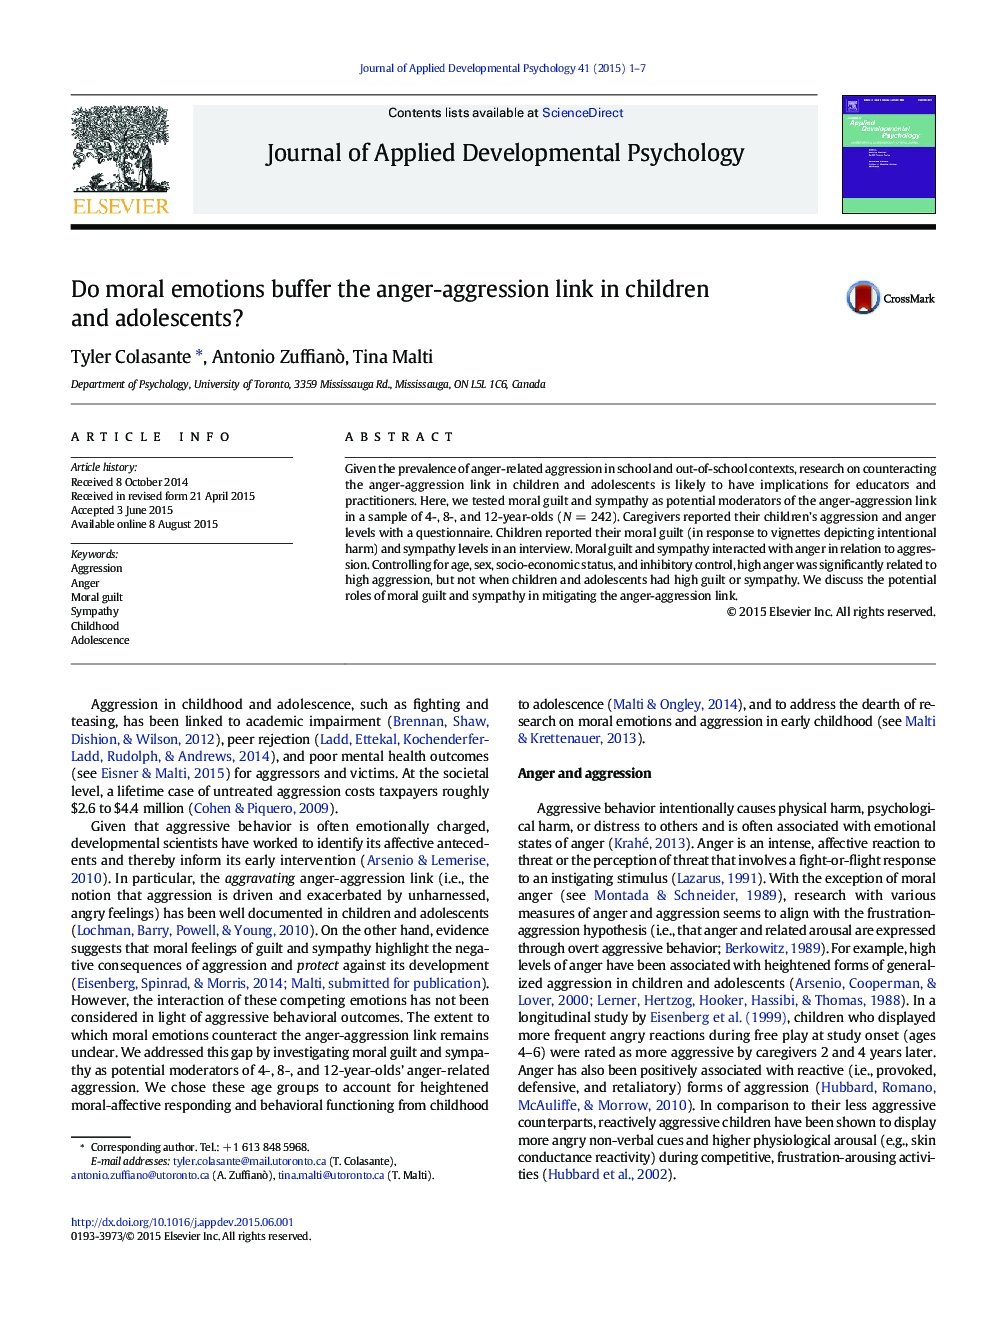 Do moral emotions buffer the anger-aggression link in children and adolescents?